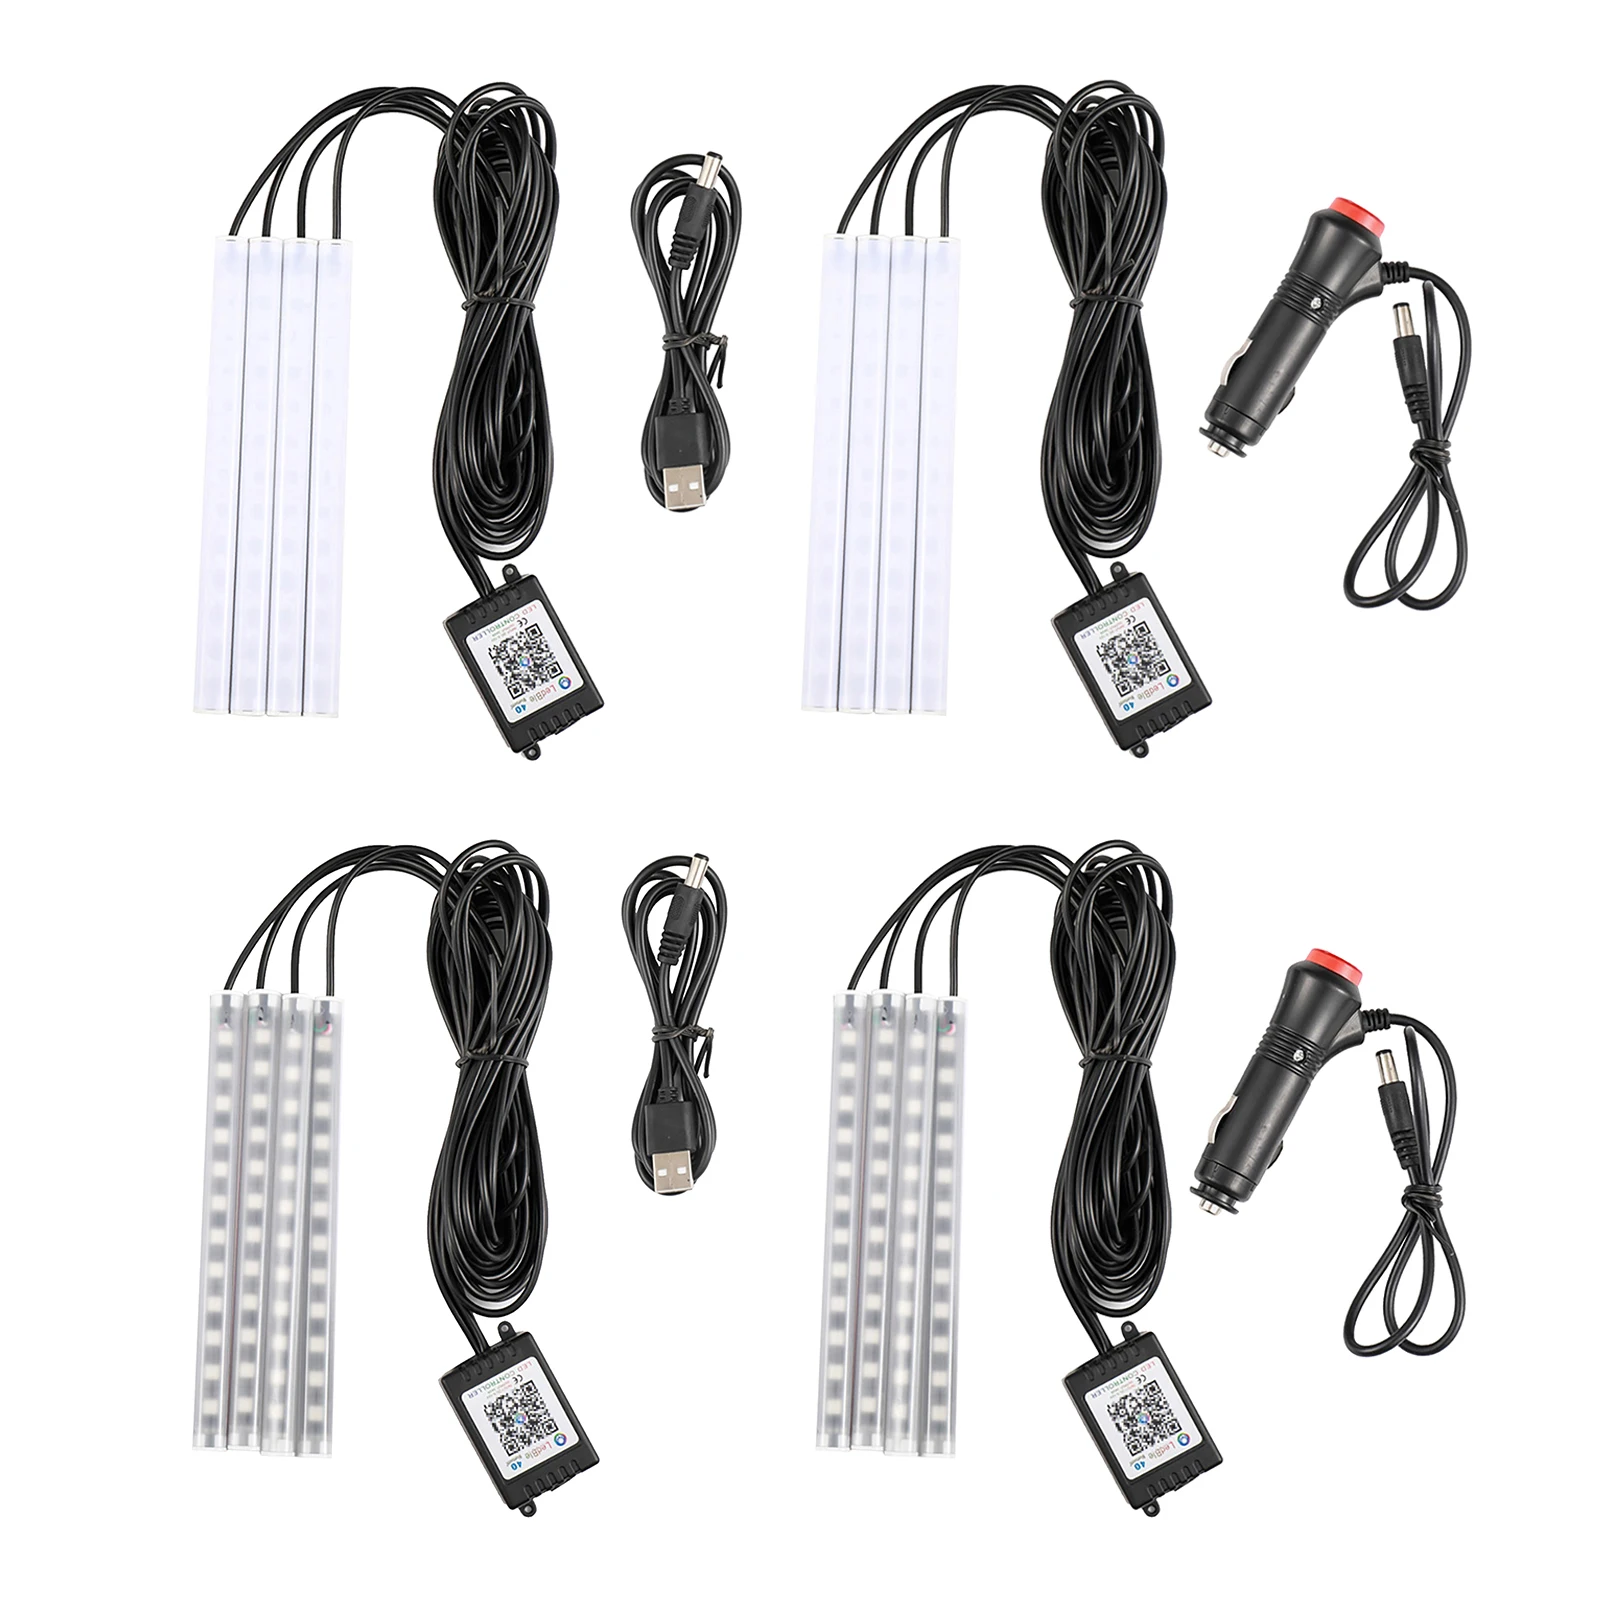 Car LED s, LED Interior Lights, MultiColor Music Car under Lighting Kit with Sound Function